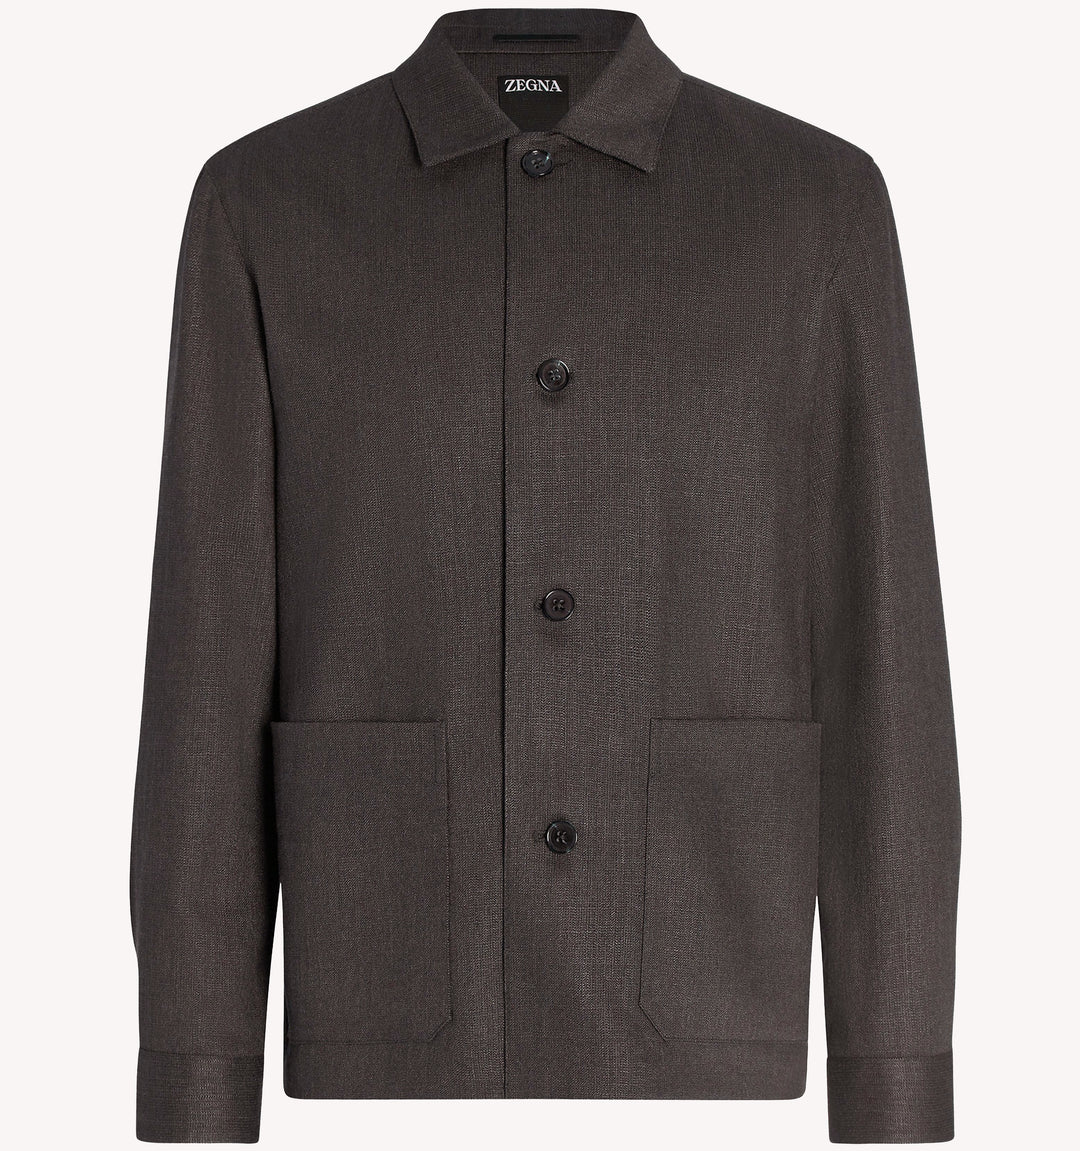 Zegna Chore Jacket in Brown